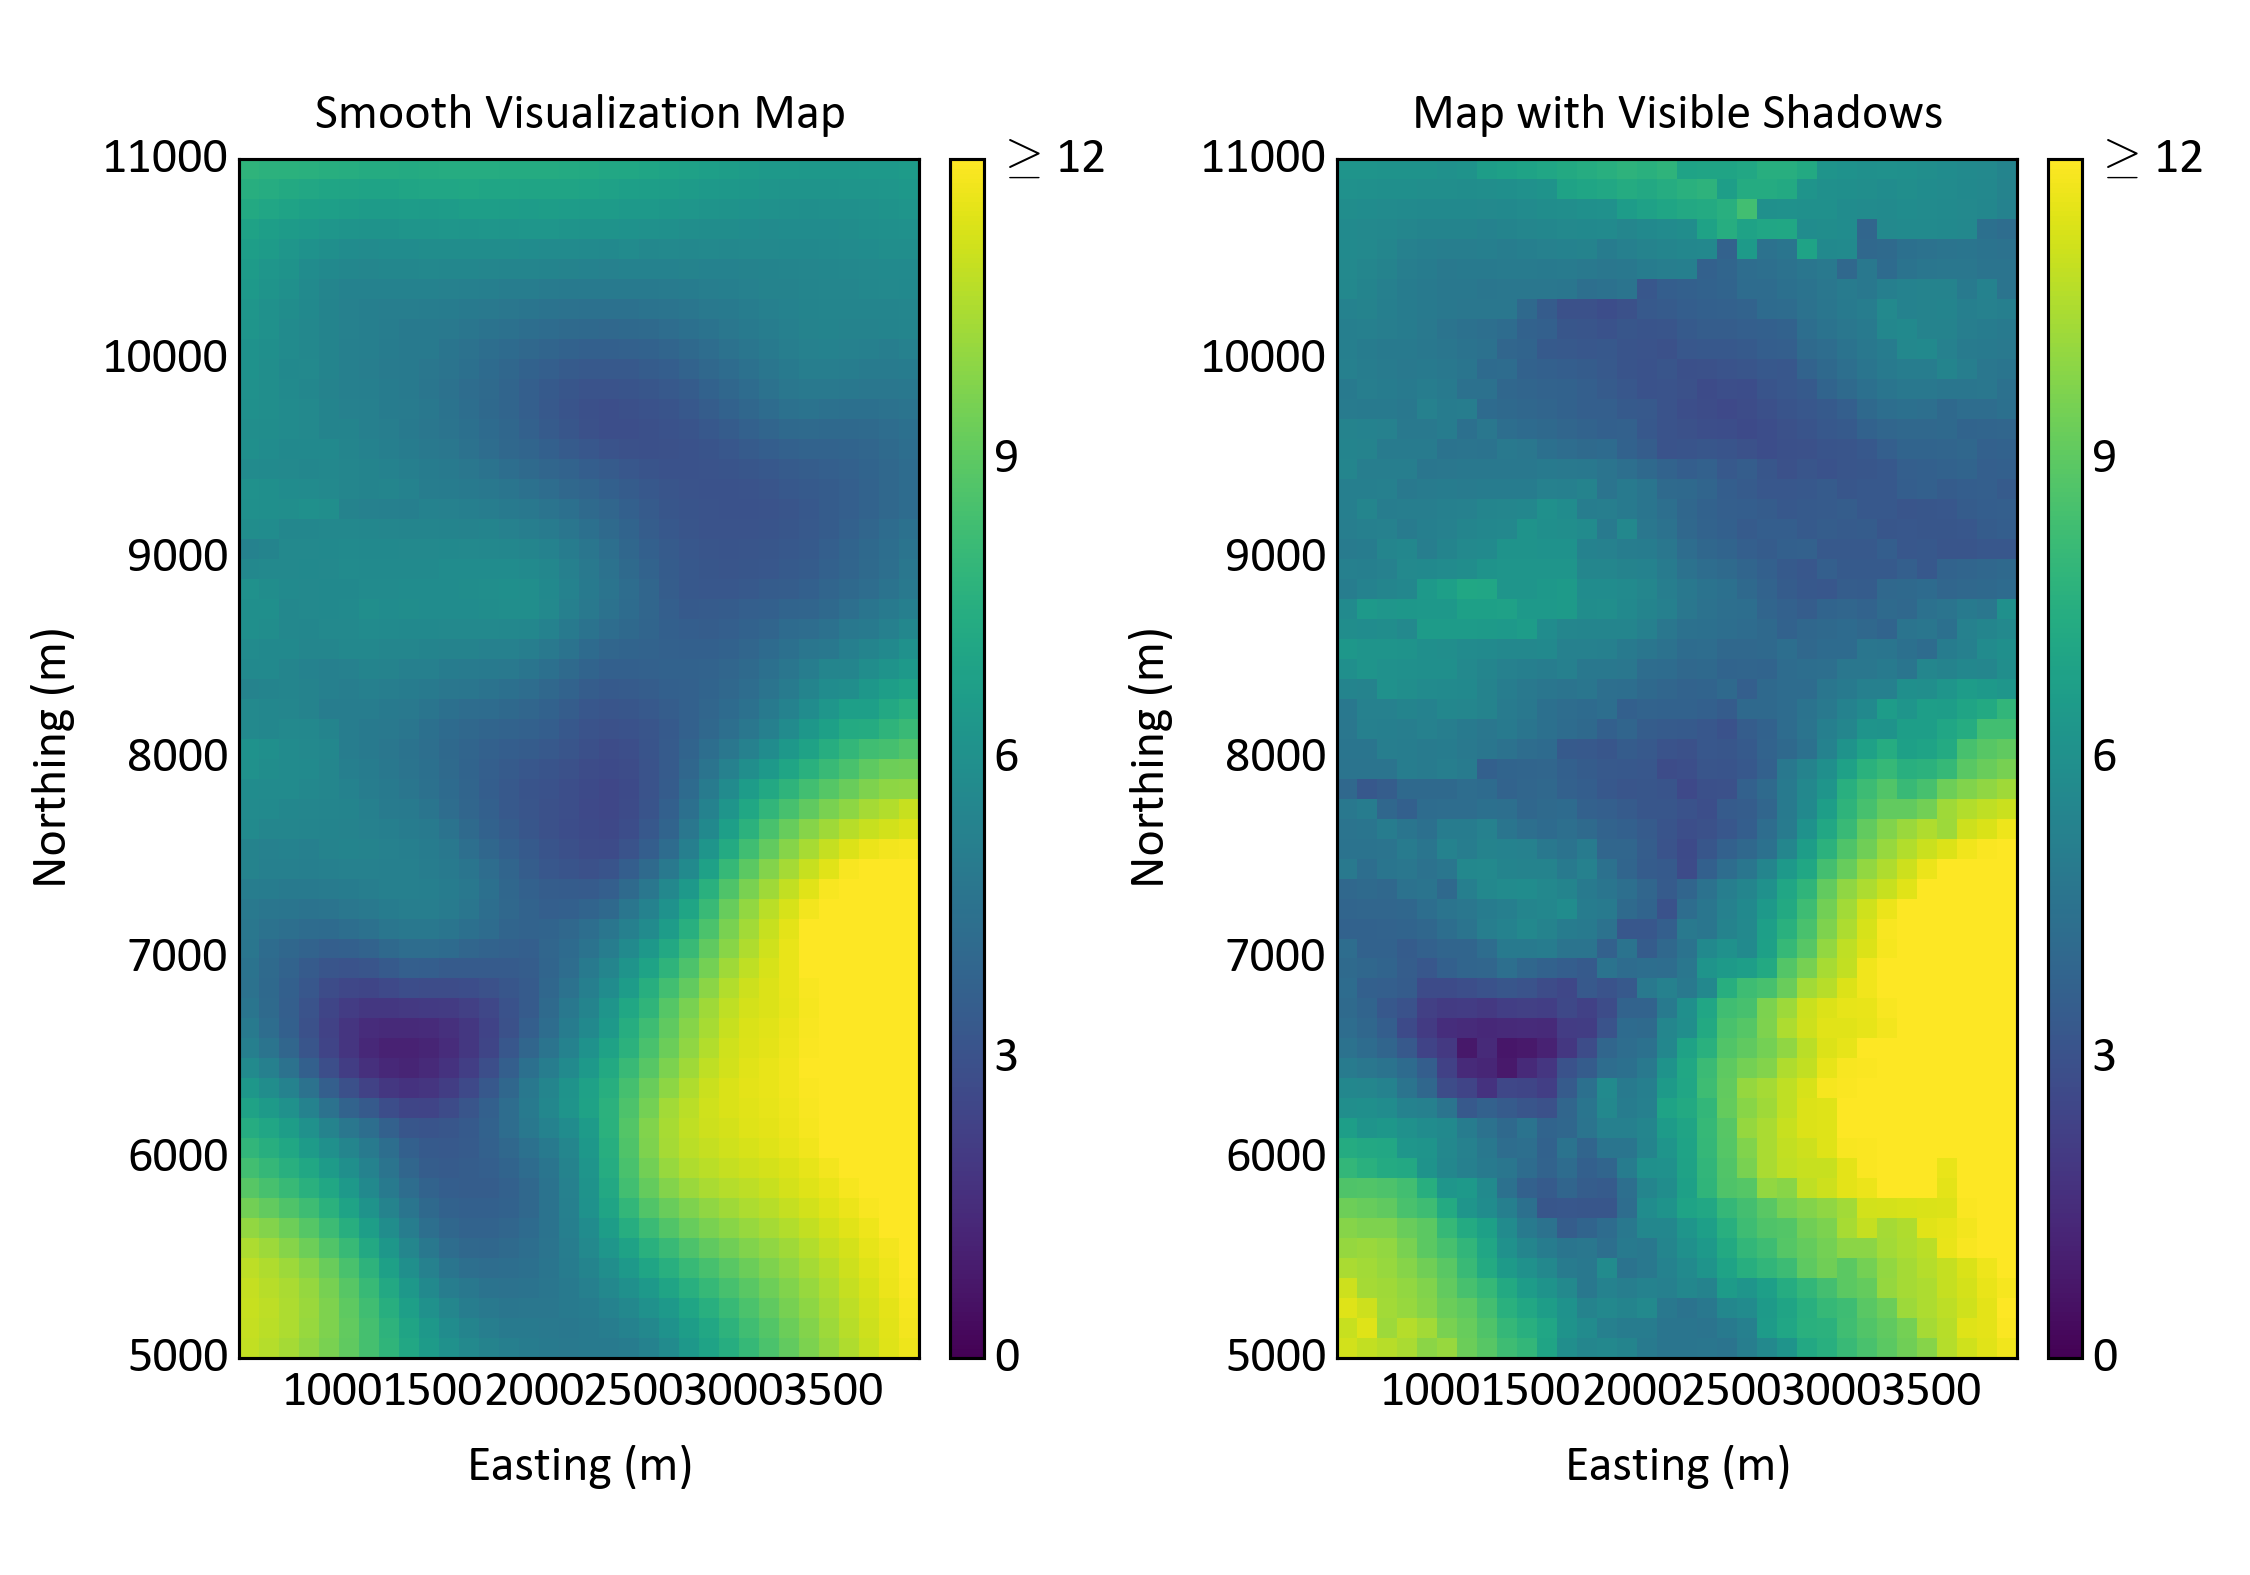 Smoothly varying visualization map (left) and a restricted search map (right) with visible shadows and artifacts.